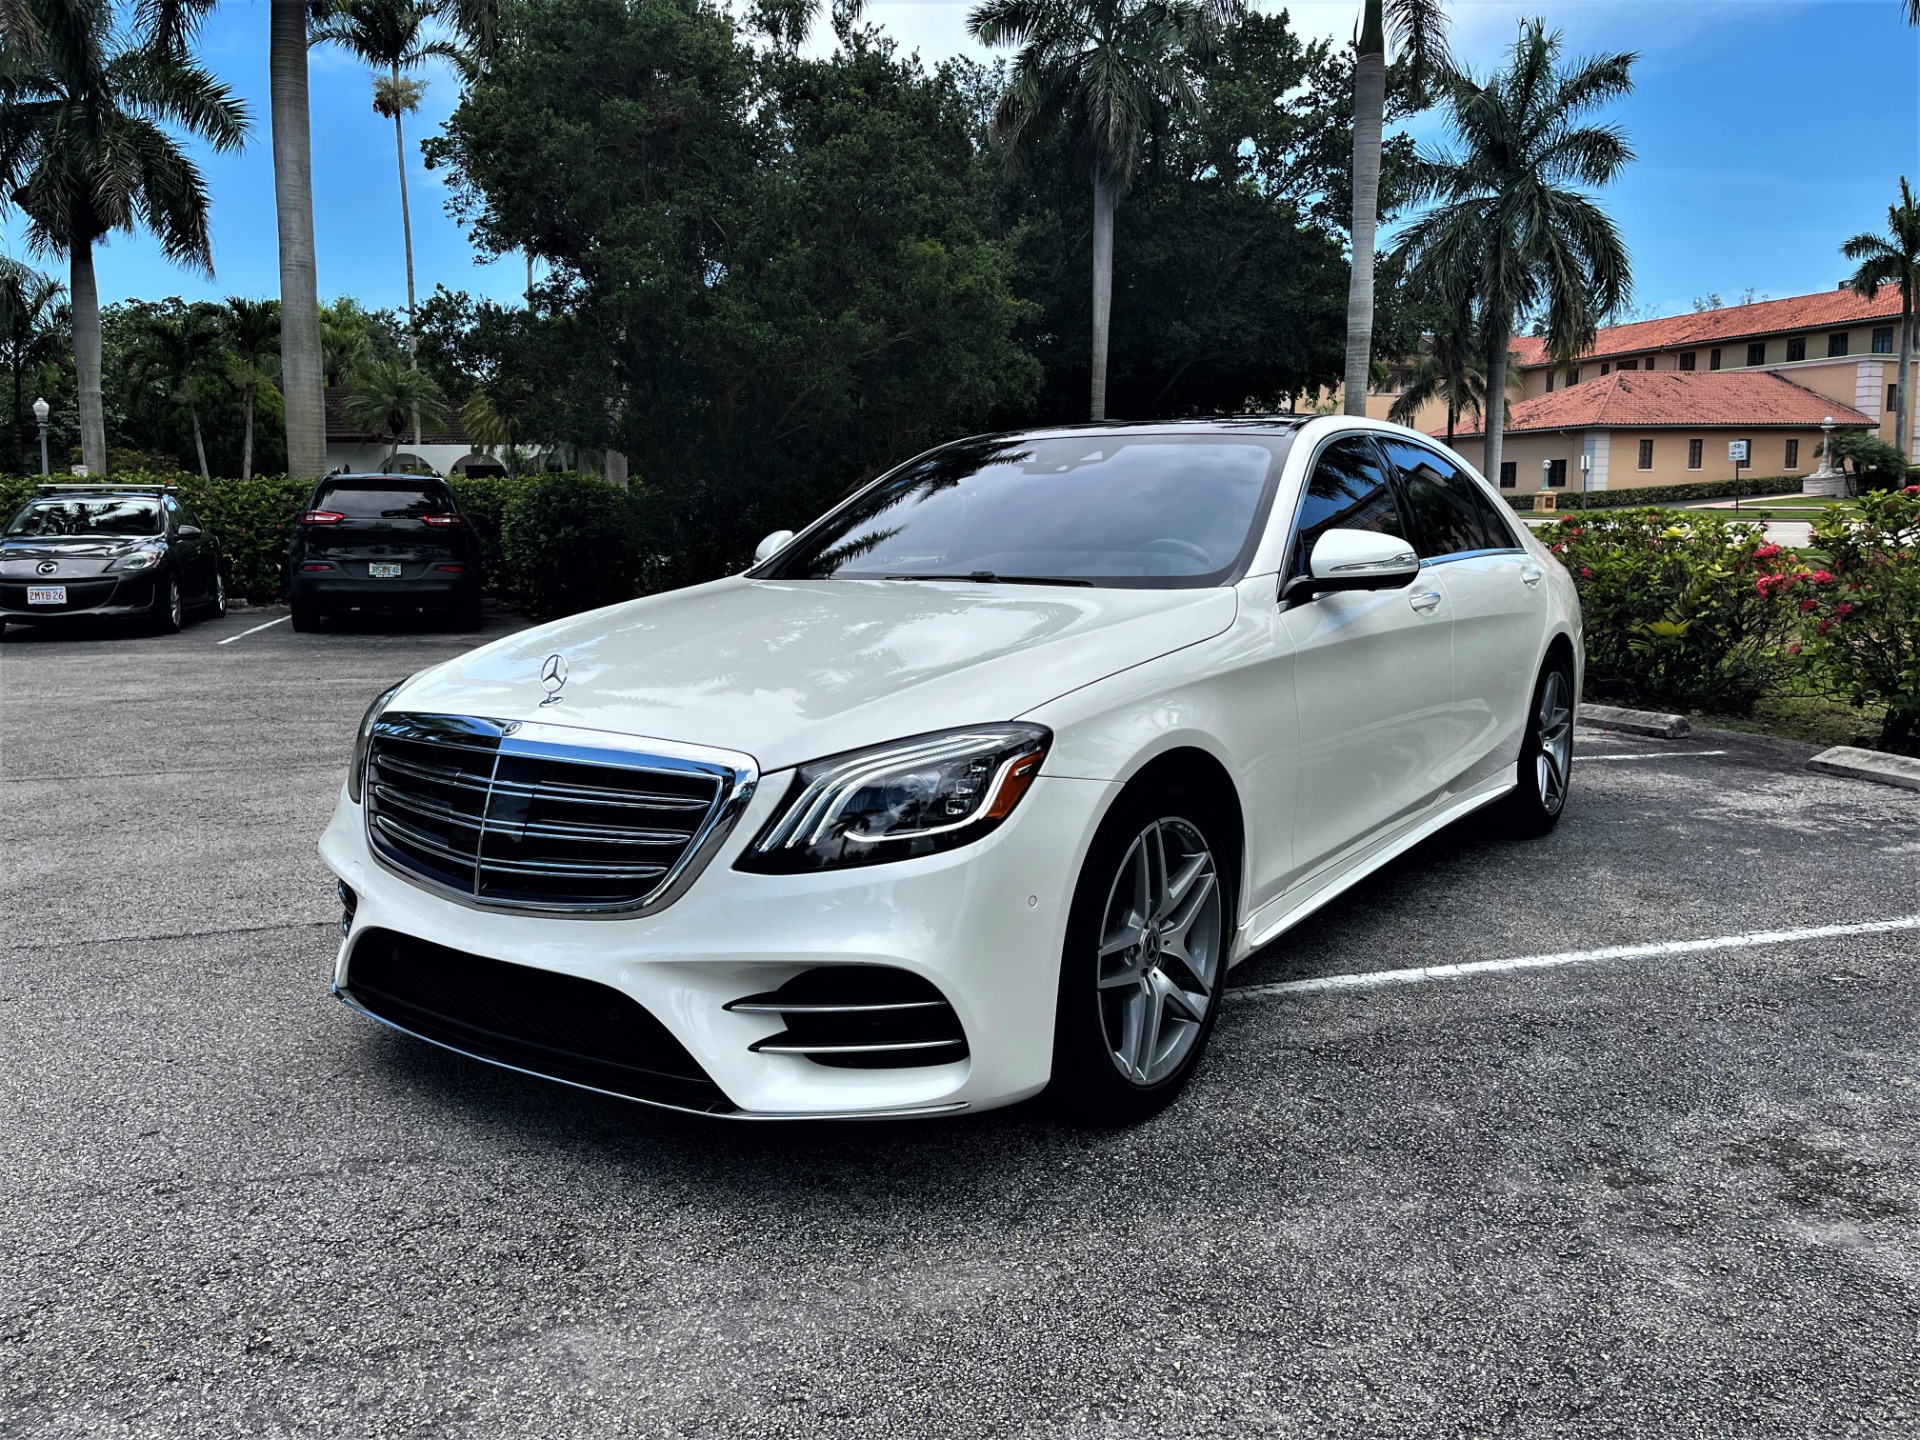 Used 2019 Mercedes-Benz S-Class S 560 4MATIC for sale $76,499 at The Gables Sports Cars in Miami FL 33146 4